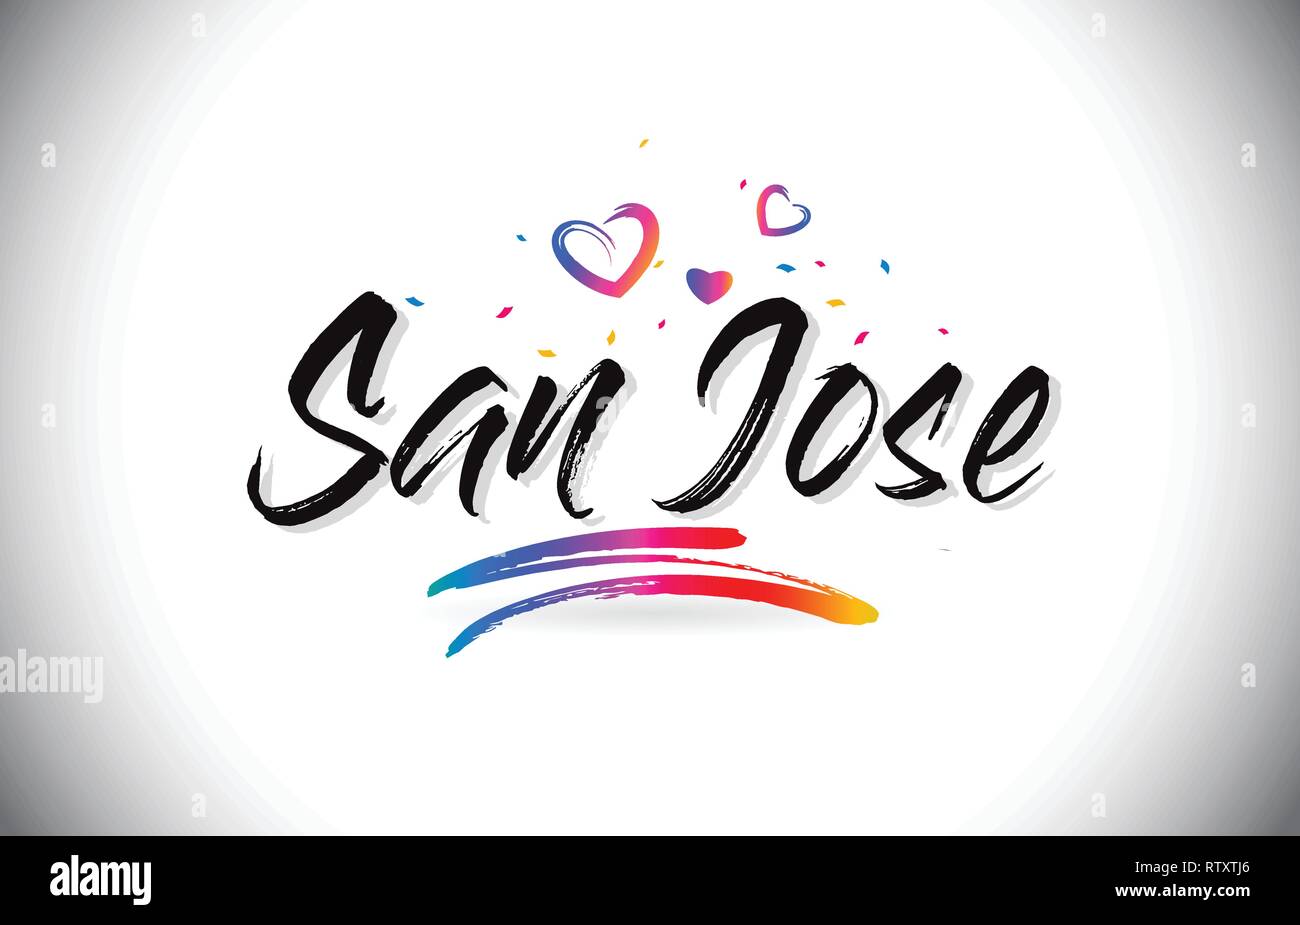 San Jose Welcome To Word Text with Love Hearts and Creative Handwritten Font Design Vector Illustration. Stock Vector